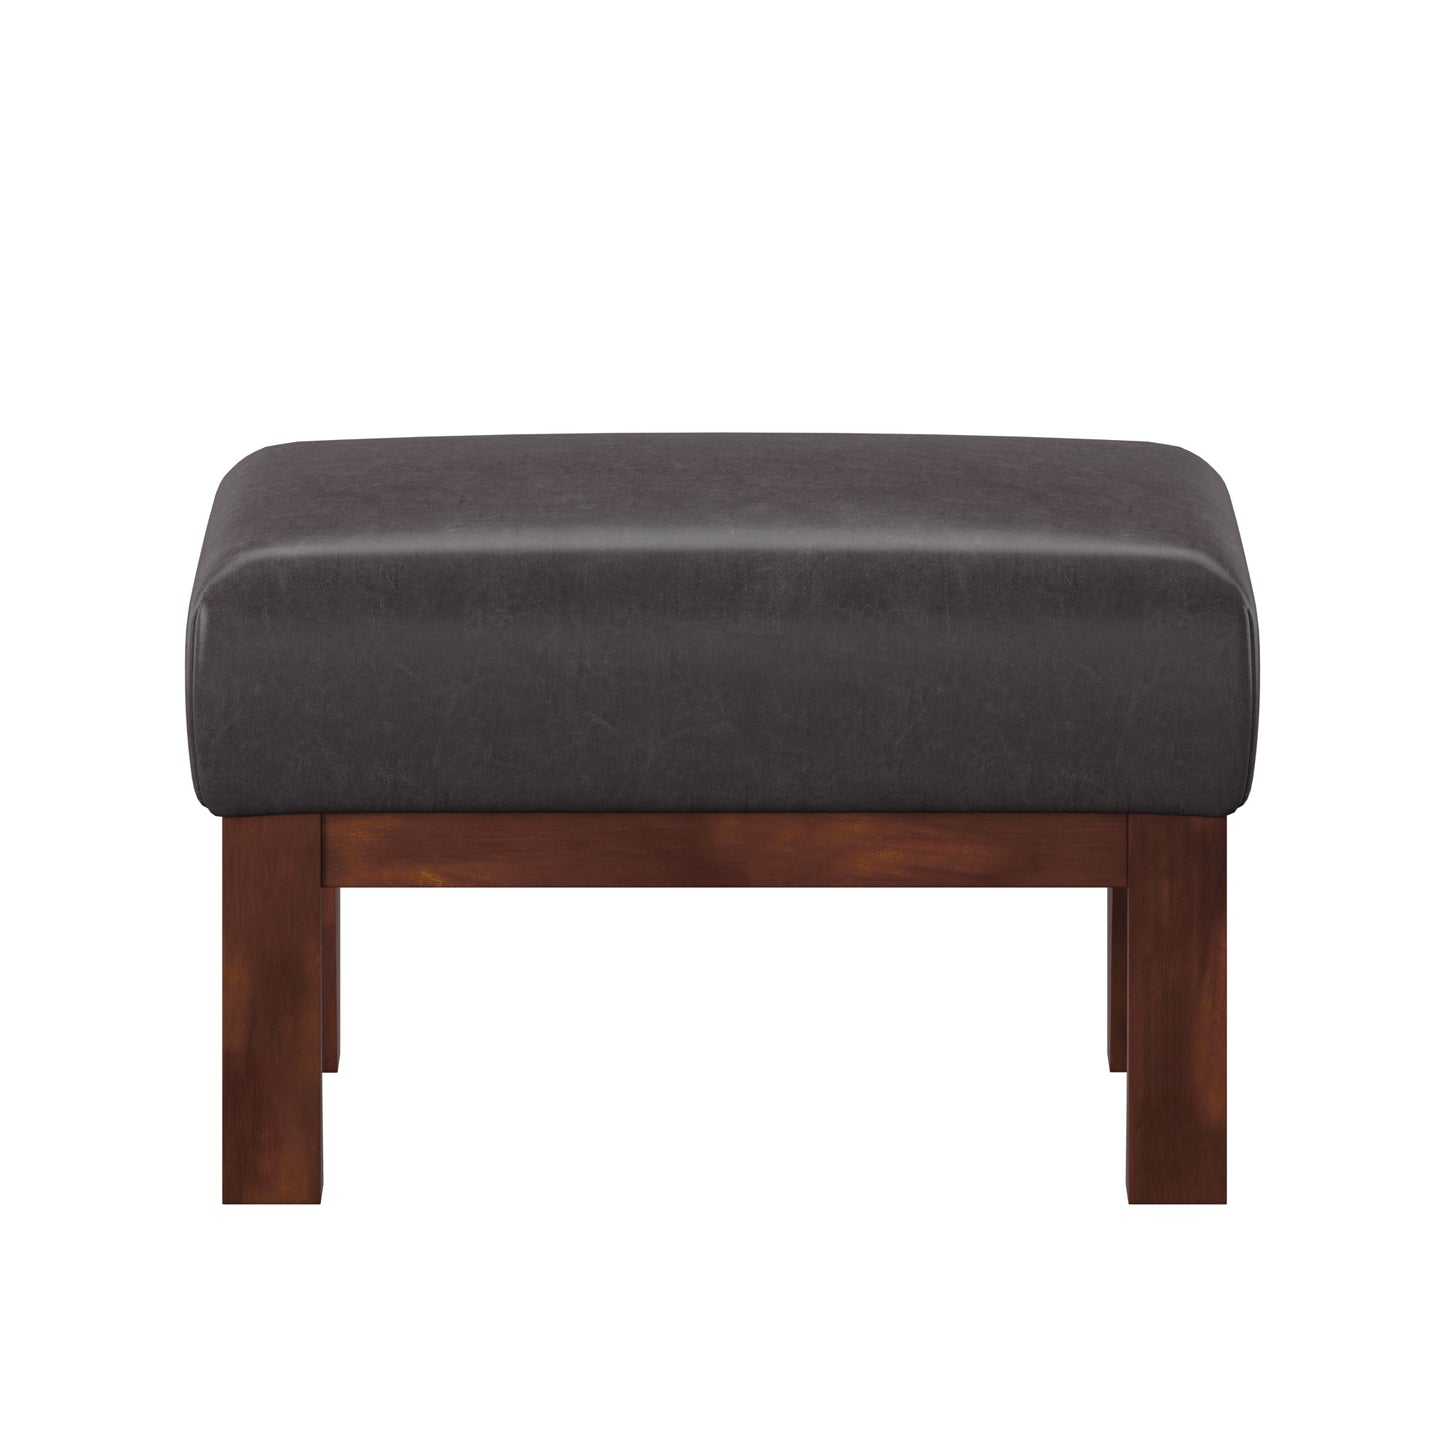 Mission-Style Wood Ottoman - Dark Brown Faux Leather, Oak Finish